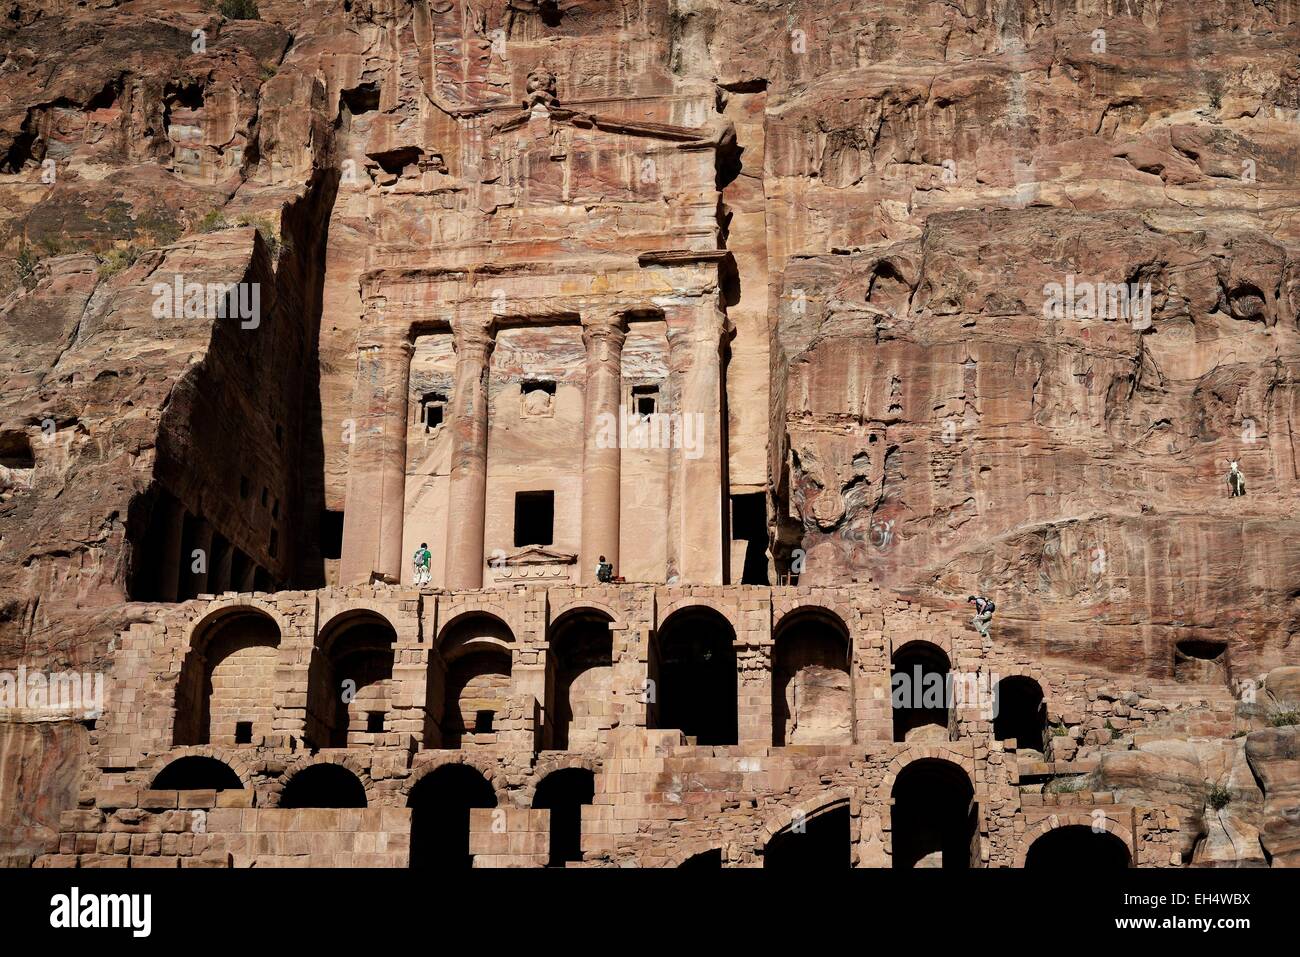 Jordan, Nabataean archeological site of Petra, listed as World Heritage by UNESCO, the Urn Tomb is part of the Royal Tombs carved in the mountain Stock Photo